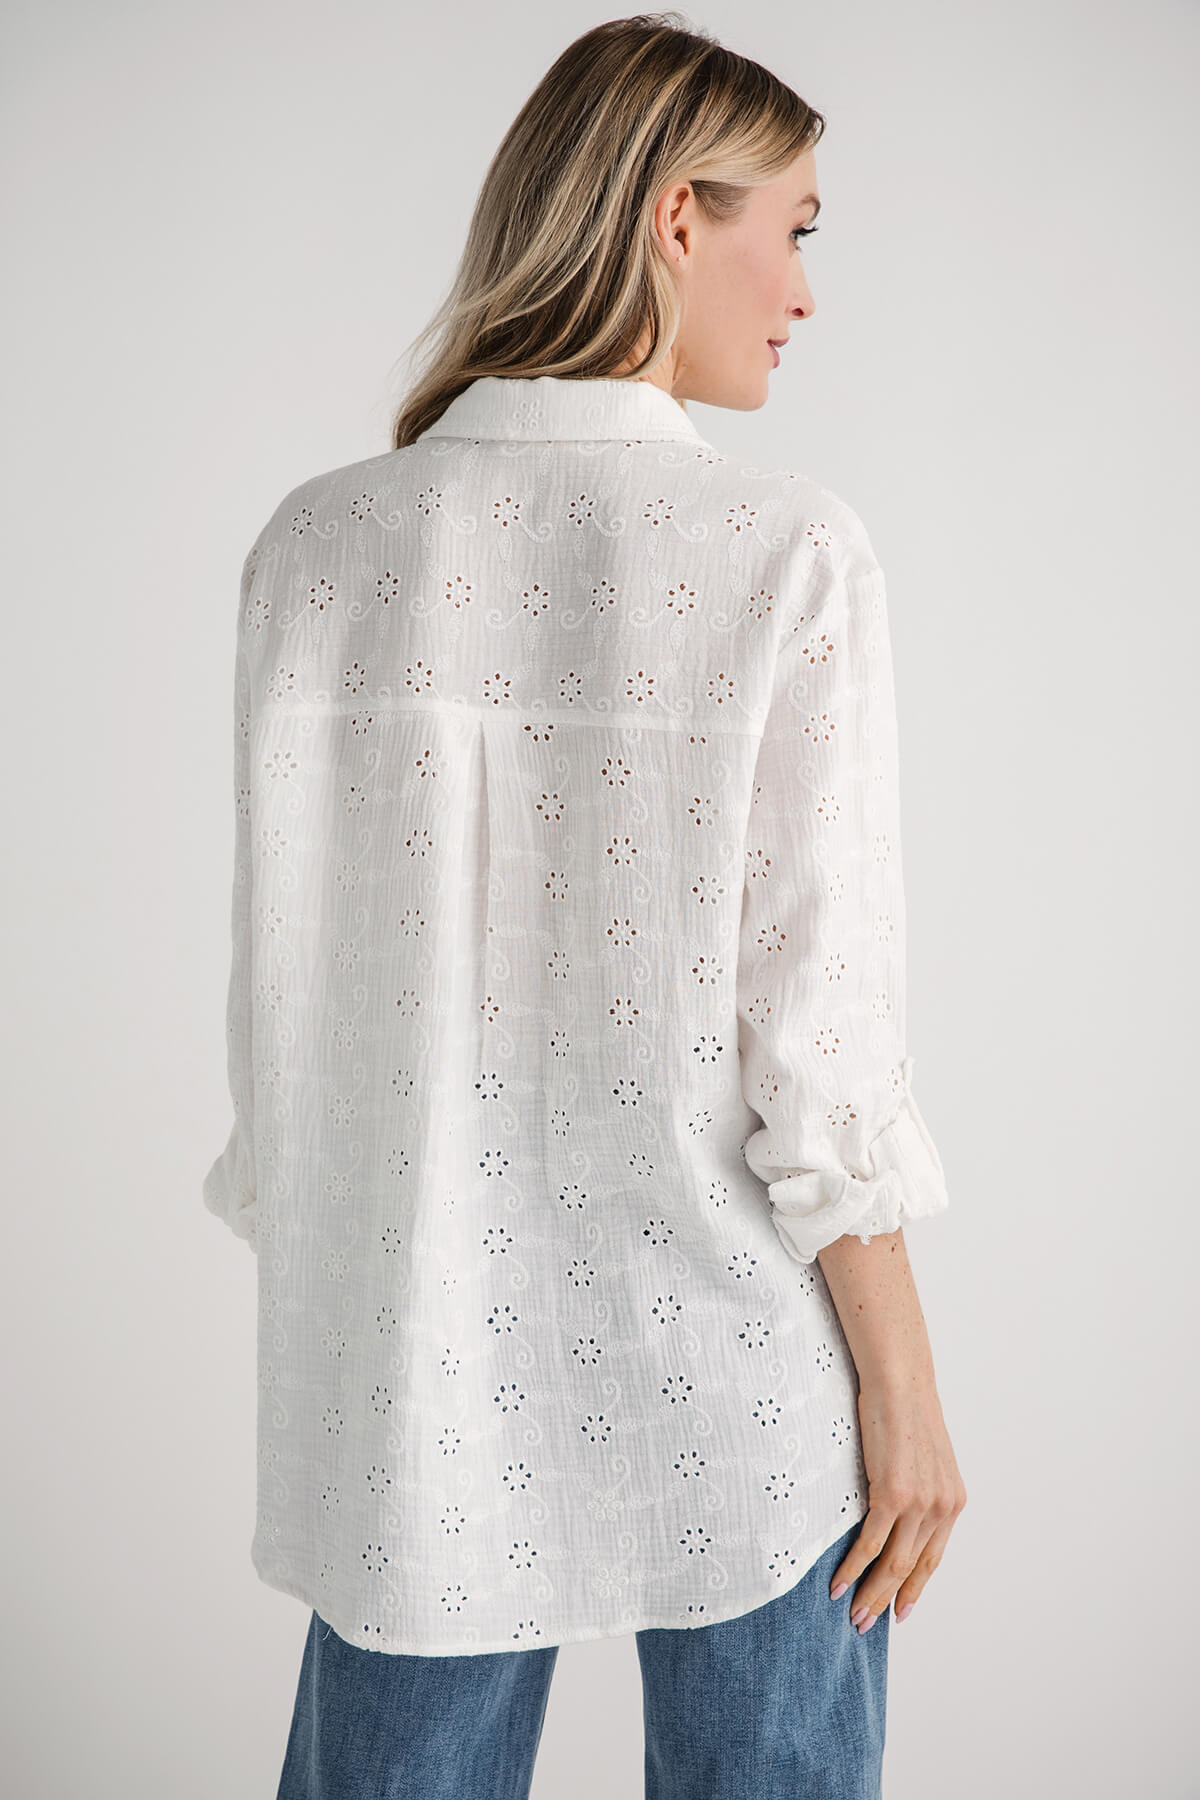 Lovestitch Eyelet Embroidered Button Down Top